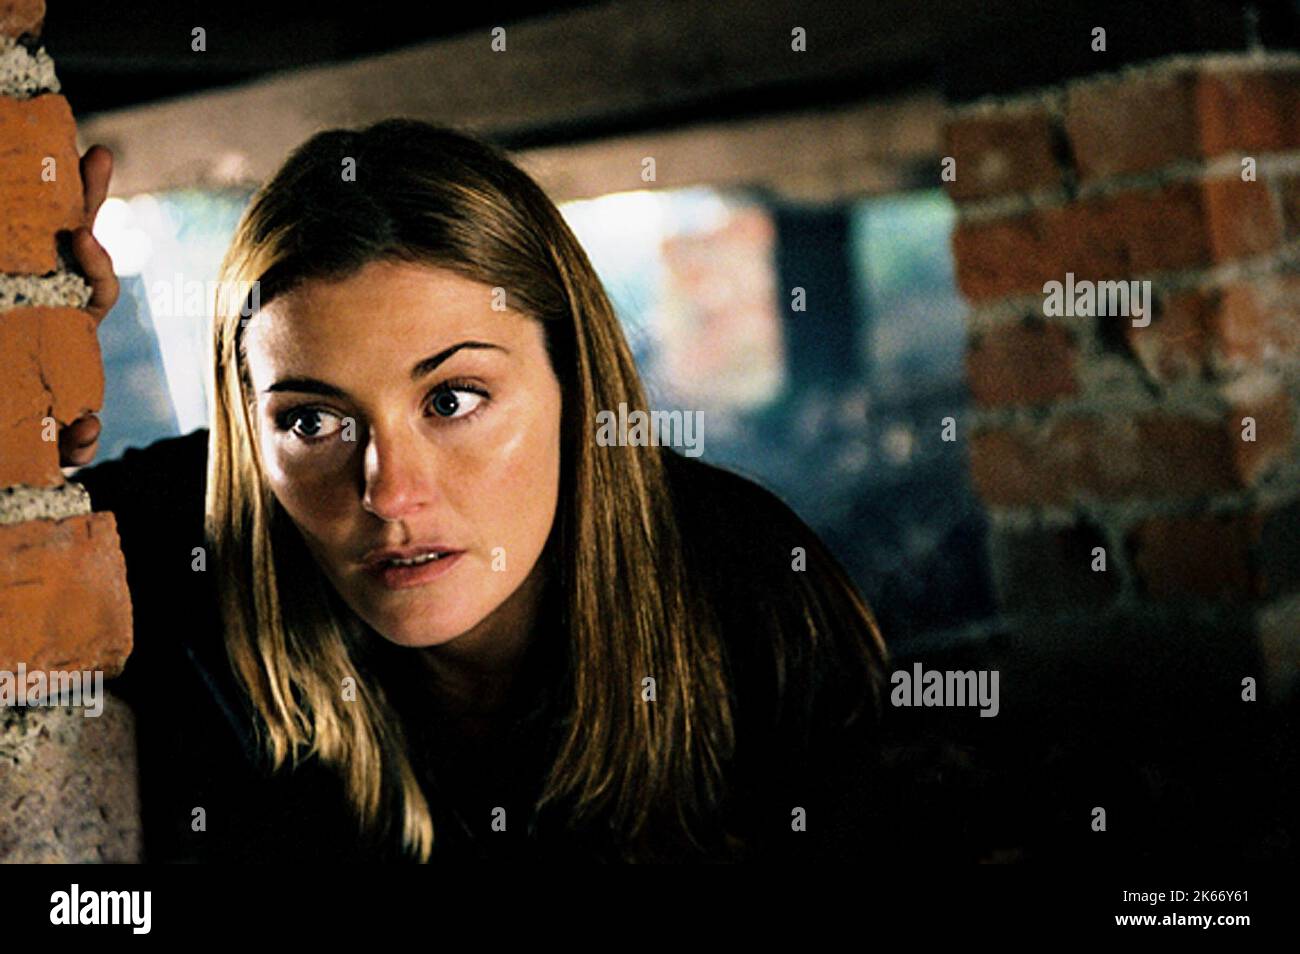 LOUISE LOMBARD, SECOND NATURE, 2003 Stock Photo